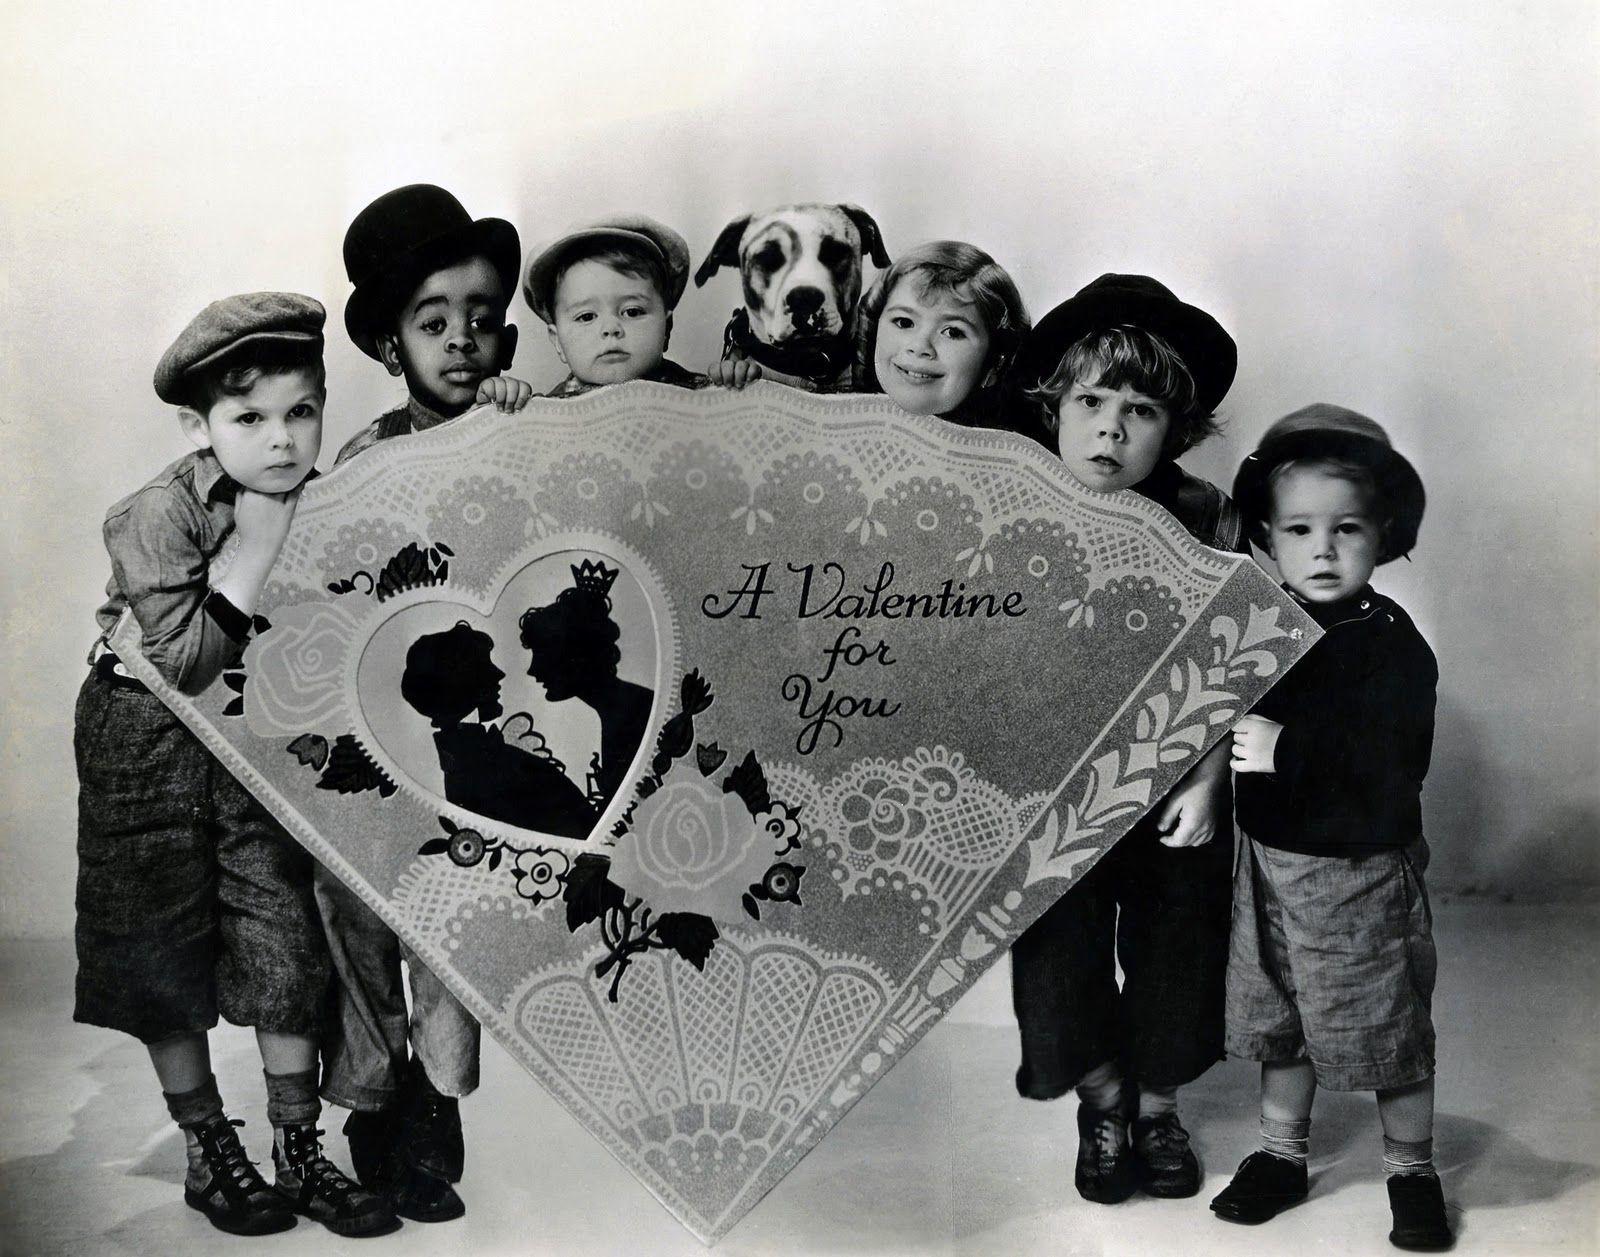 image For > The Little Rascals Spanky